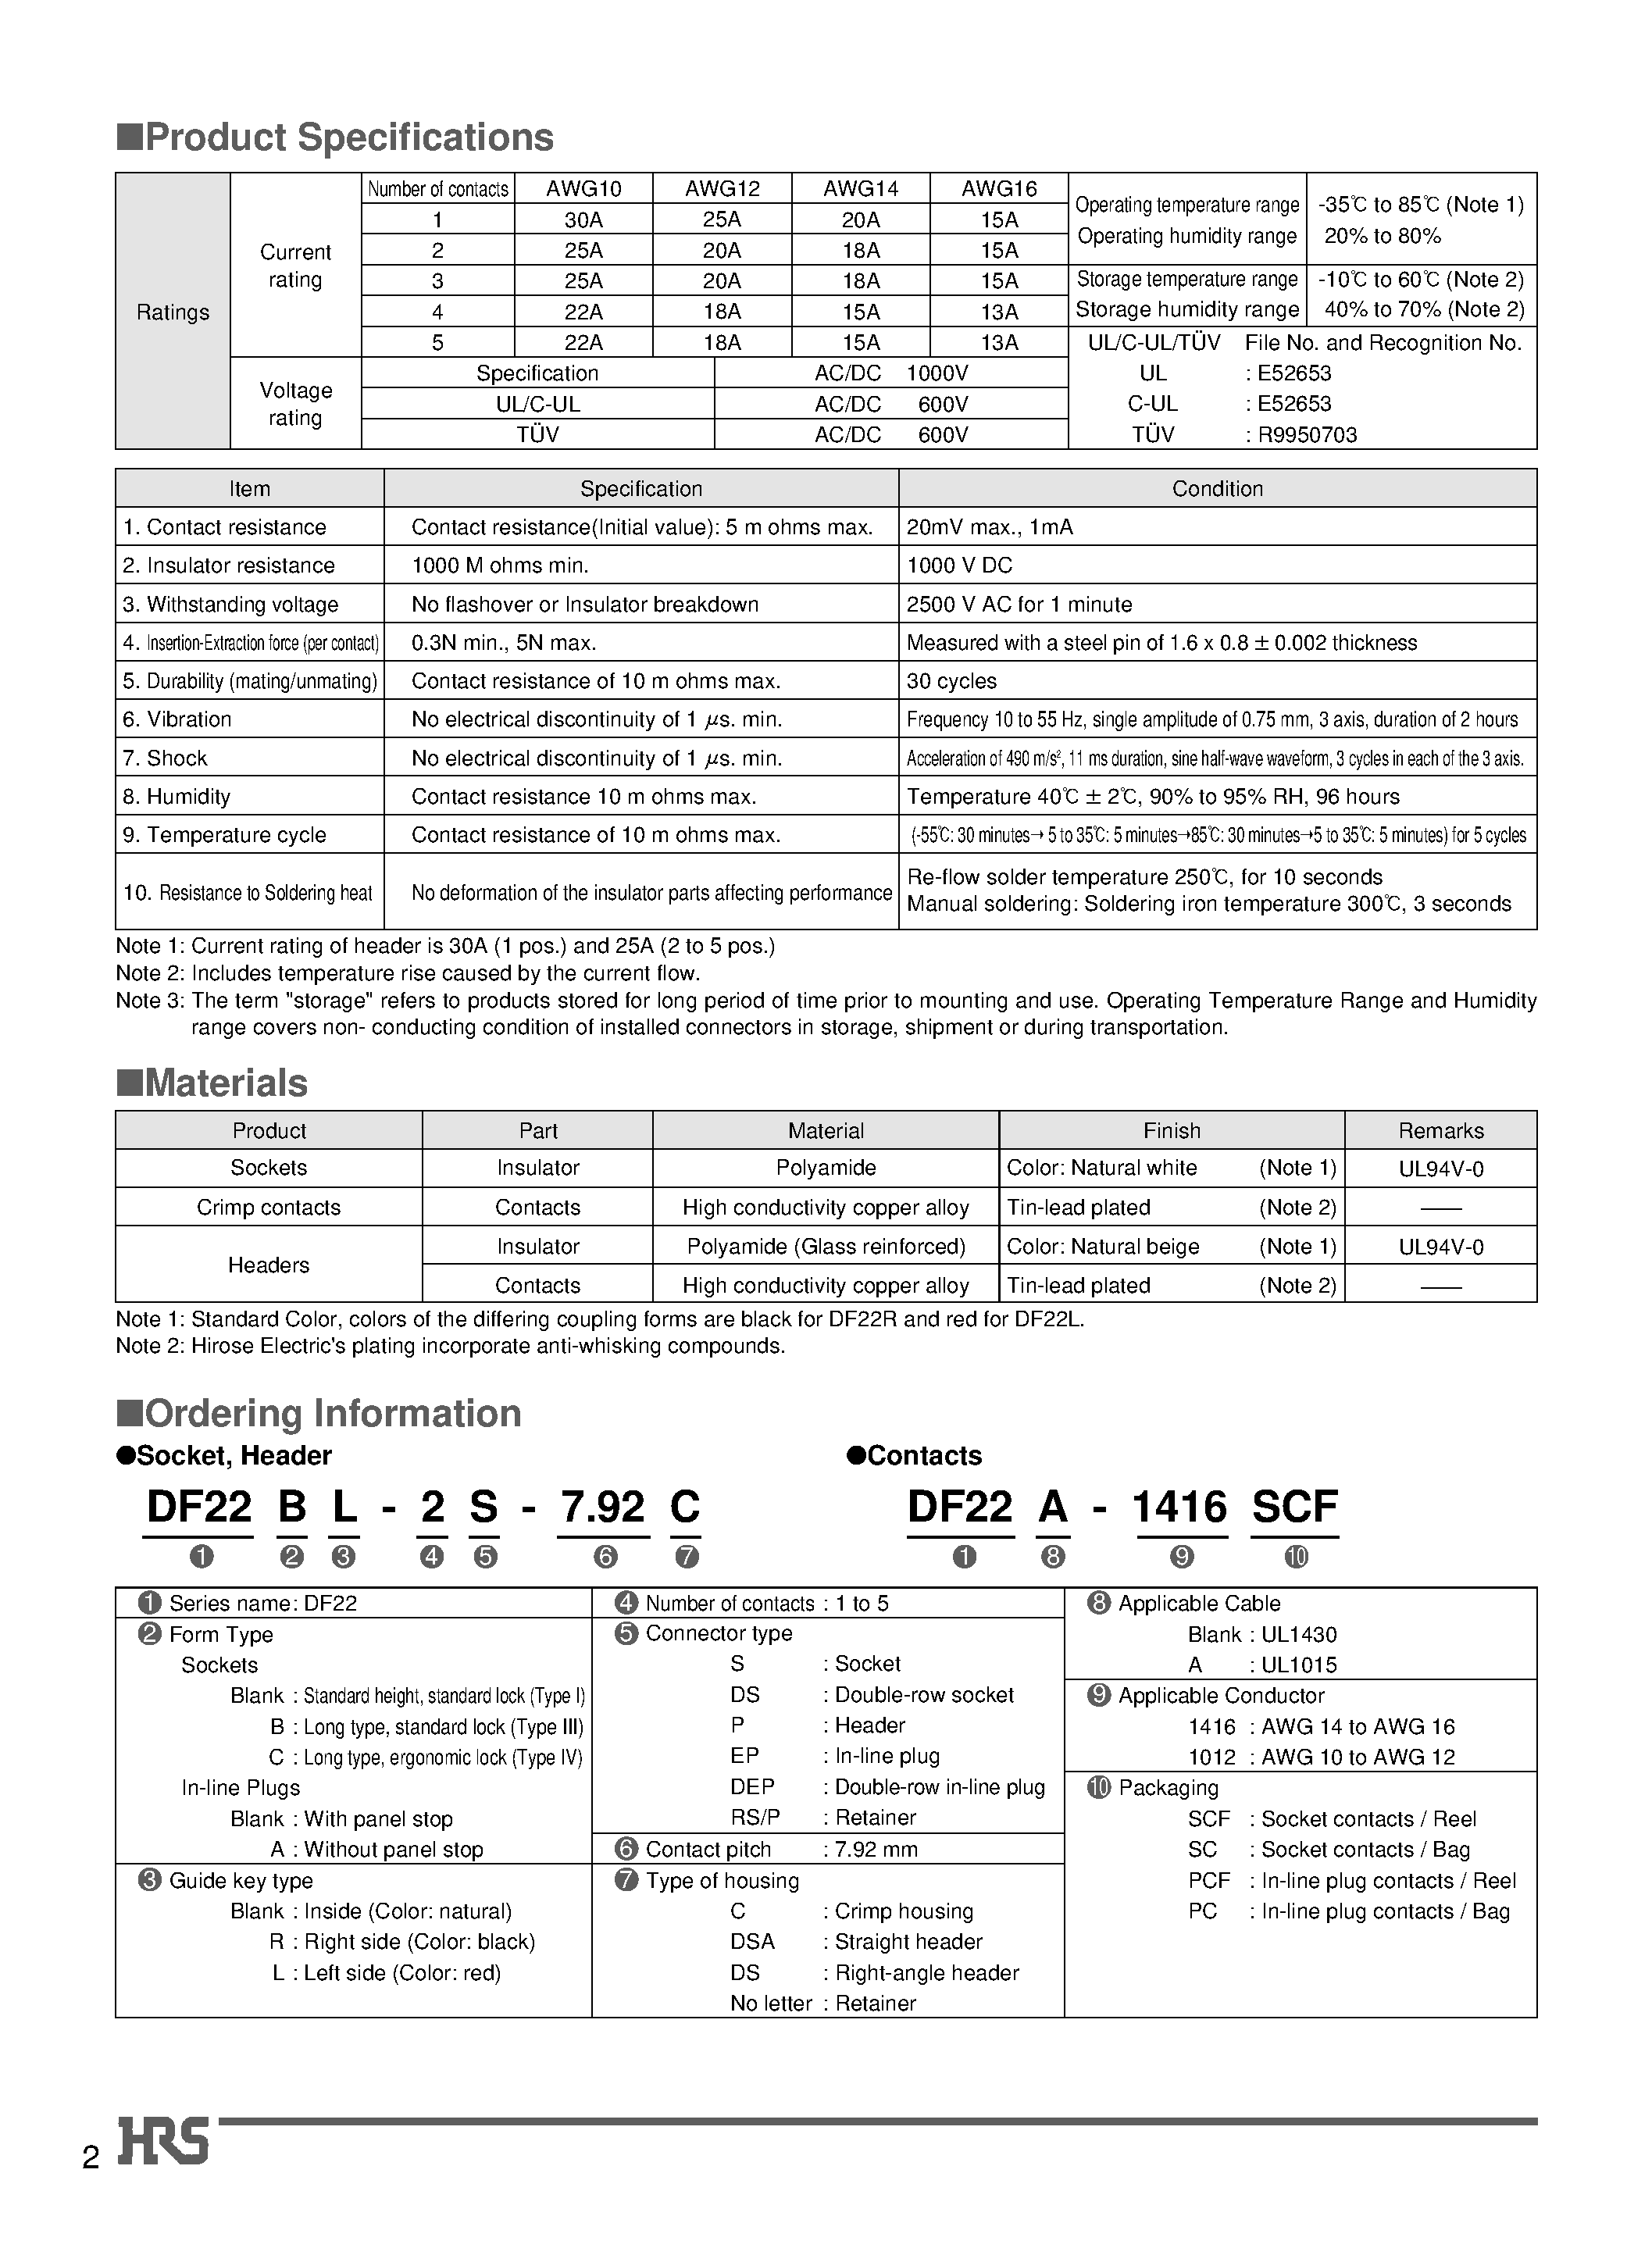 Datasheet DF22-4DS-7.92C - 7.92 mm Contact Pitch/ High-Current Connectors for Internal Power Supplies (UL/ C-UL and TUV Listed) page 2